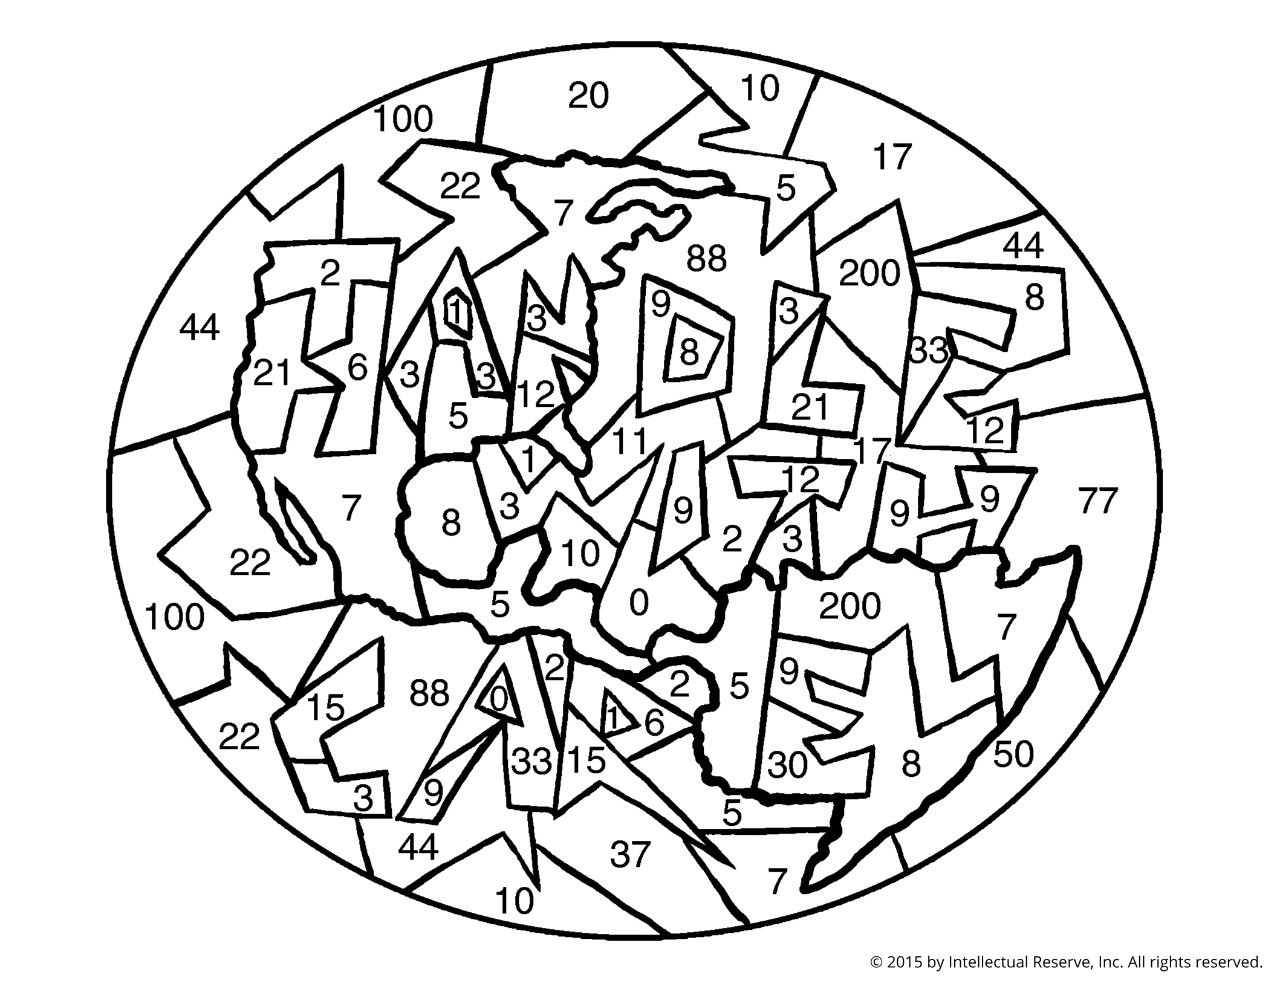 A puzzle with numbers on each piece, which, when colored, will create a word with a phrase written in the center.